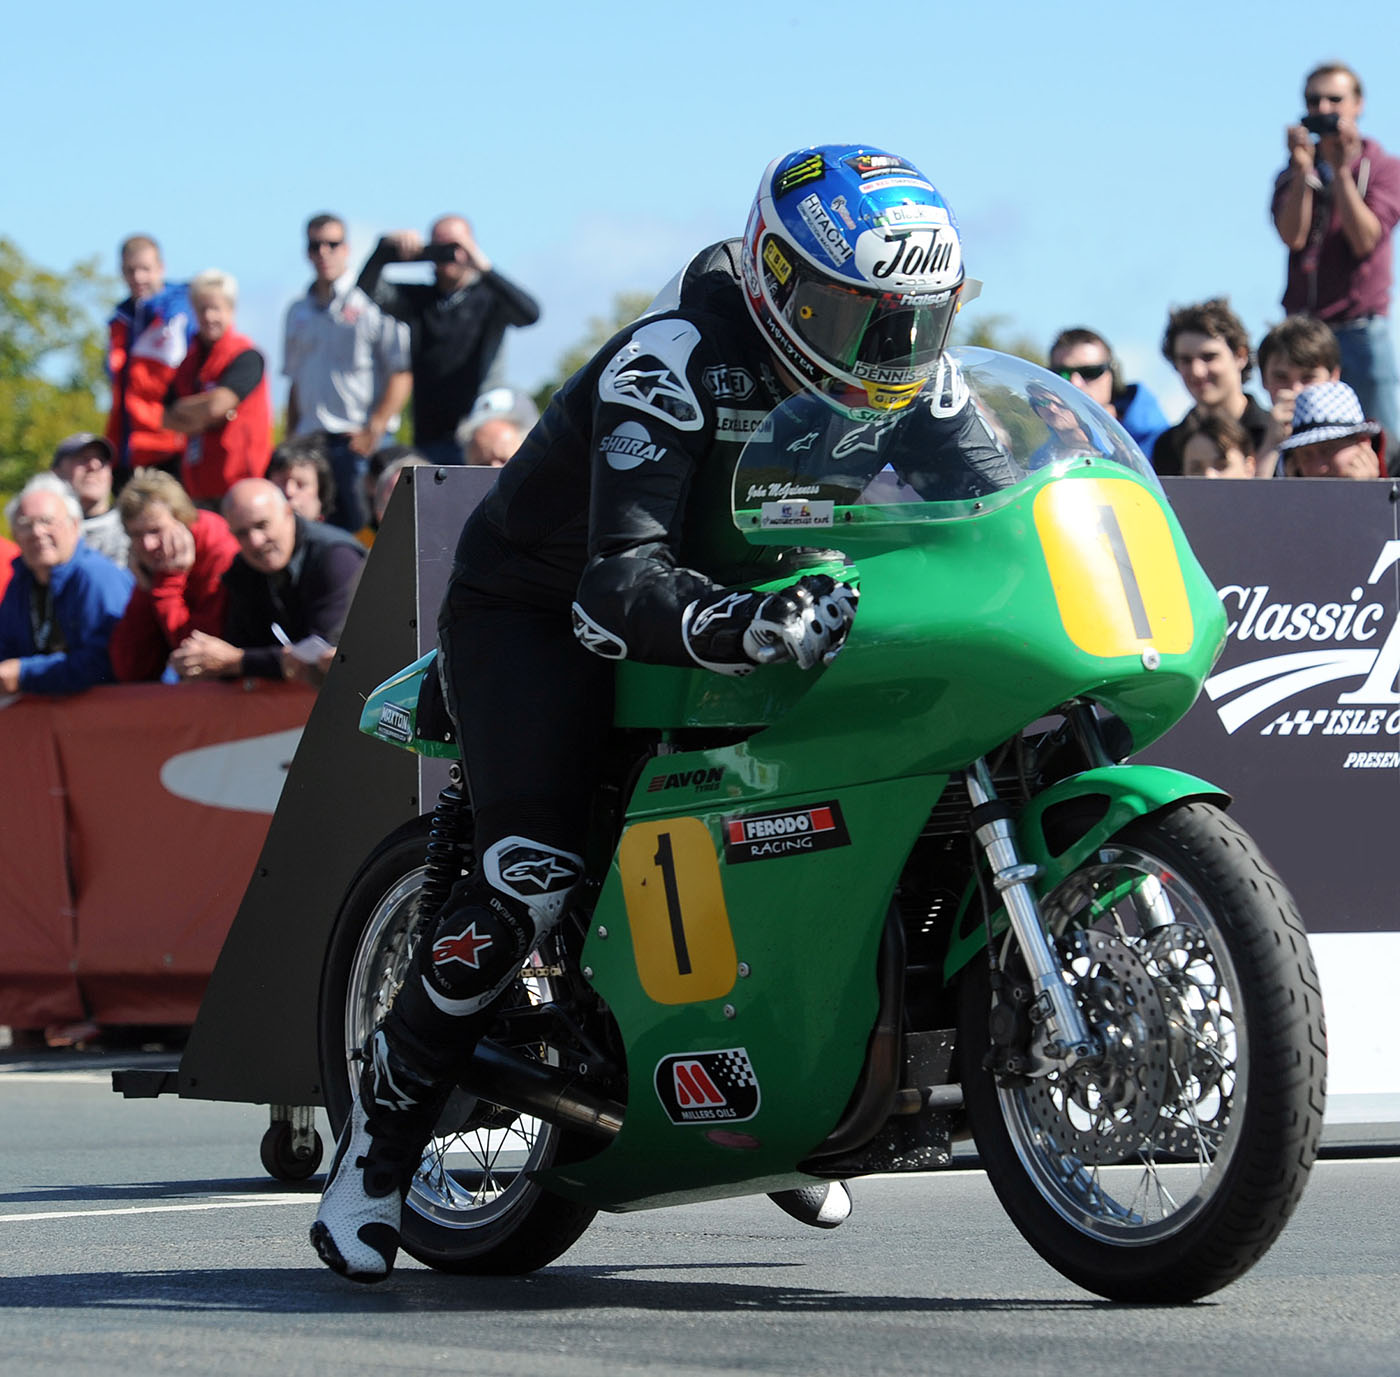 John McGuinness leaves the line at the beginning of the 500cc Classic TT race. Image from Pacemaker Press International